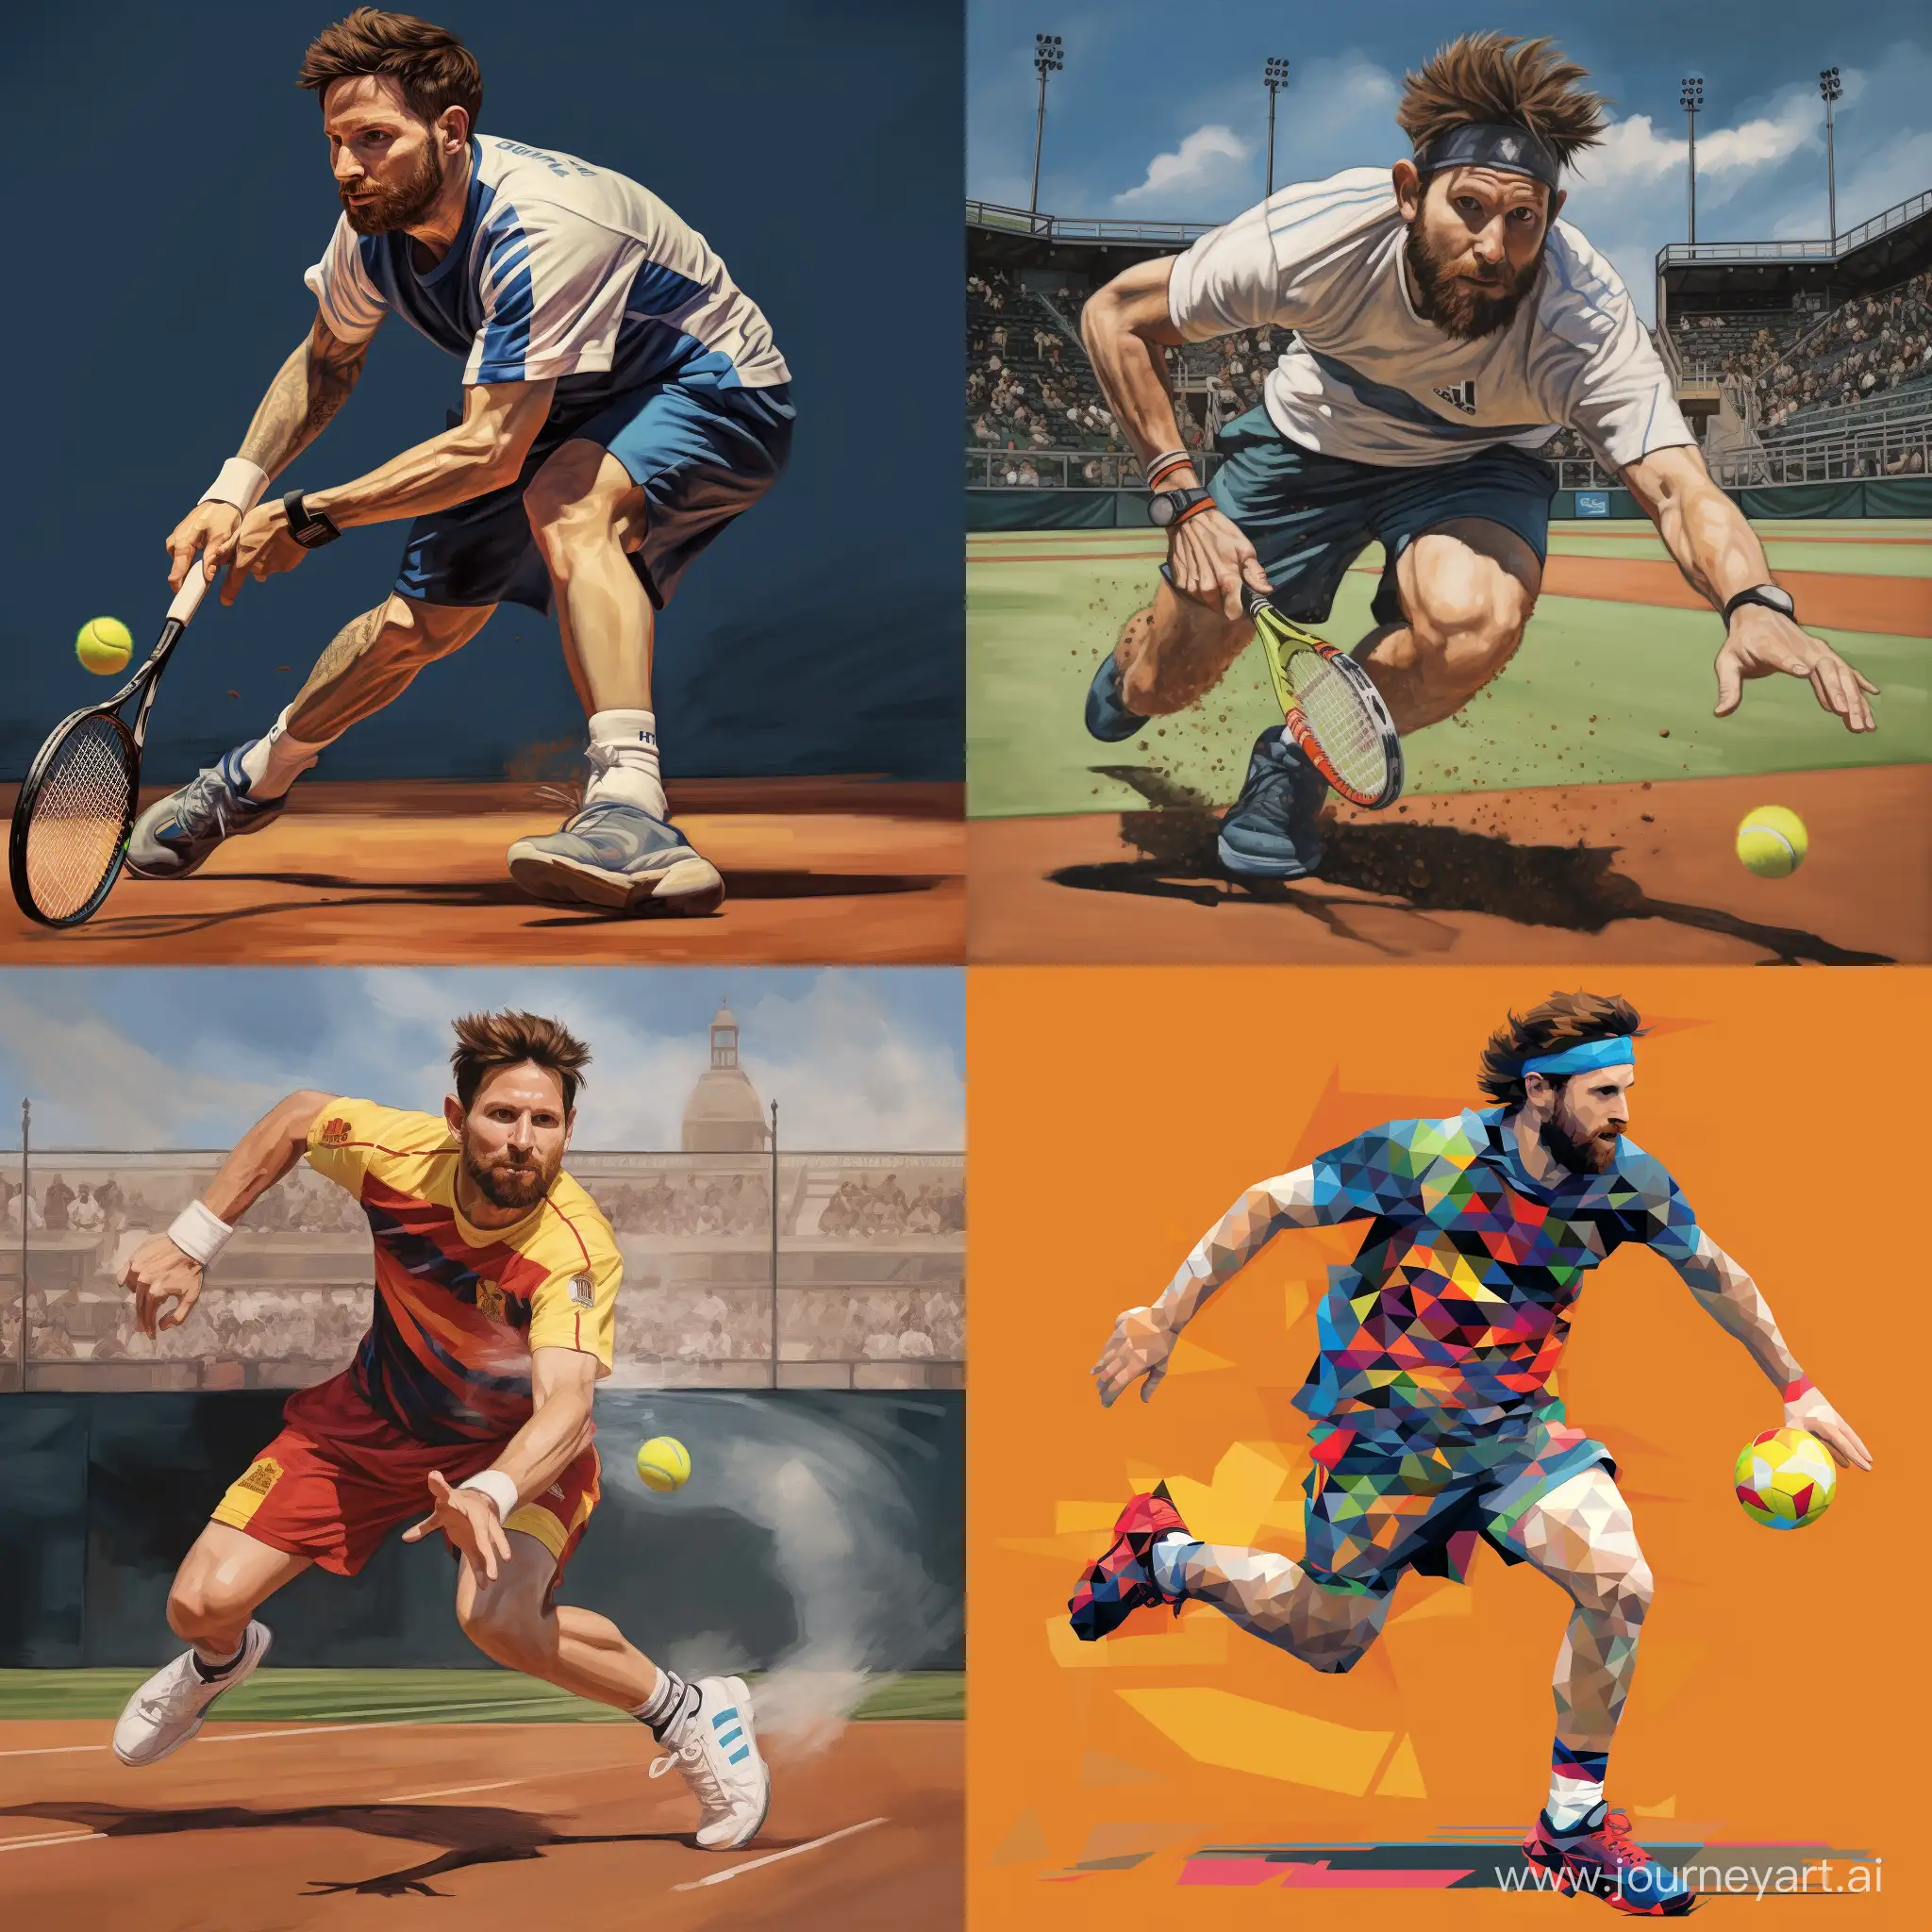 Soccer-Legend-Messi-Engages-in-Intense-11-Tennis-Match-ActionPacked-Sports-Moment